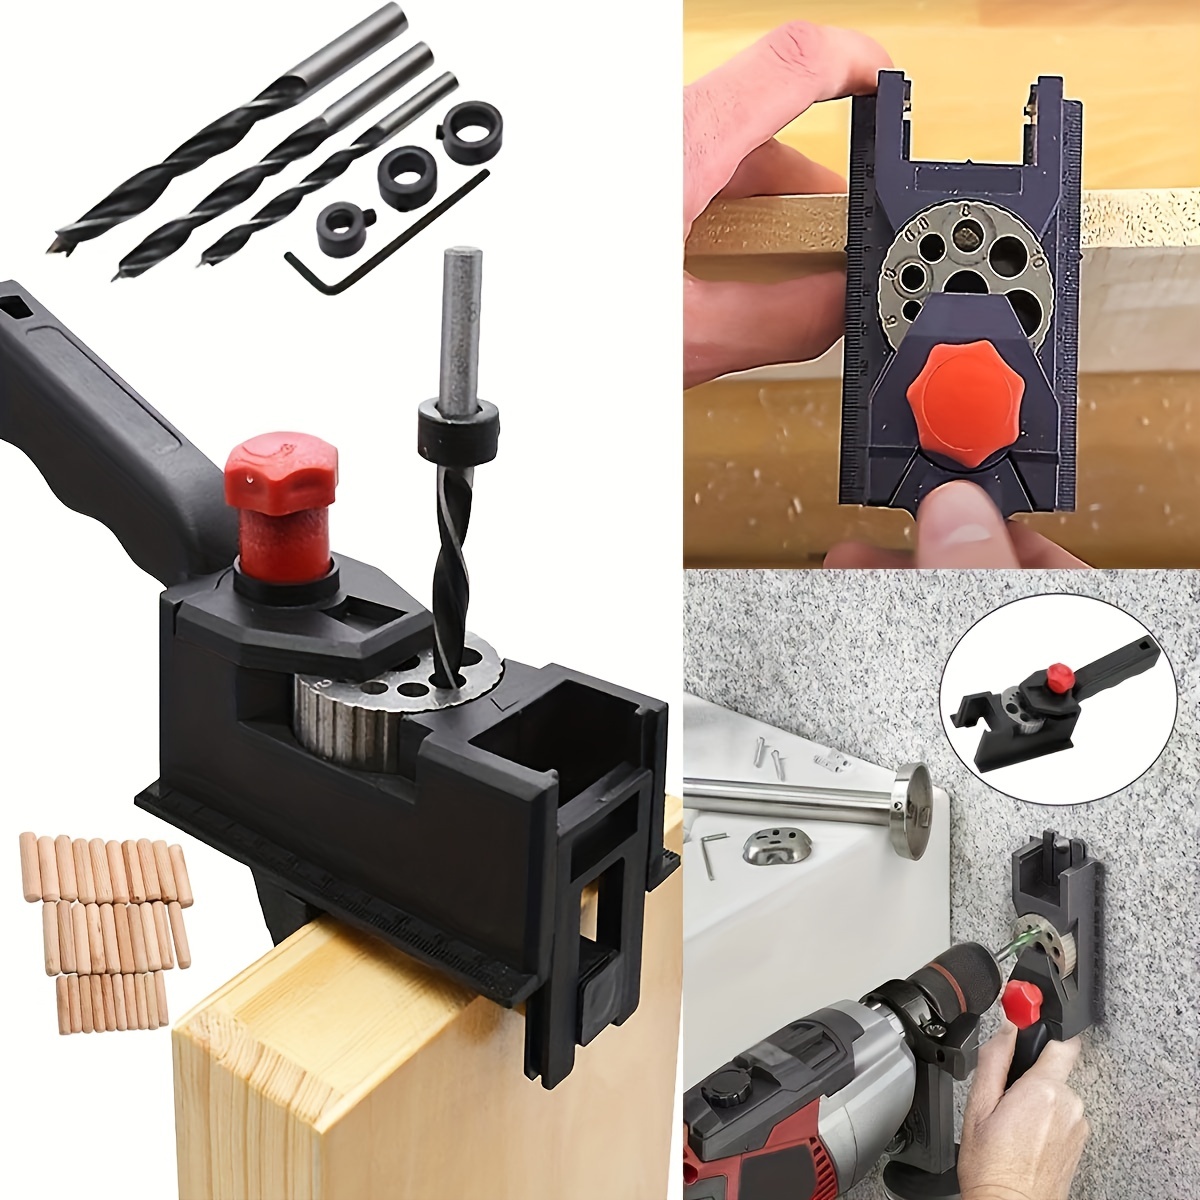 Upgrade Your Woodworking Projects With This Professional-grade